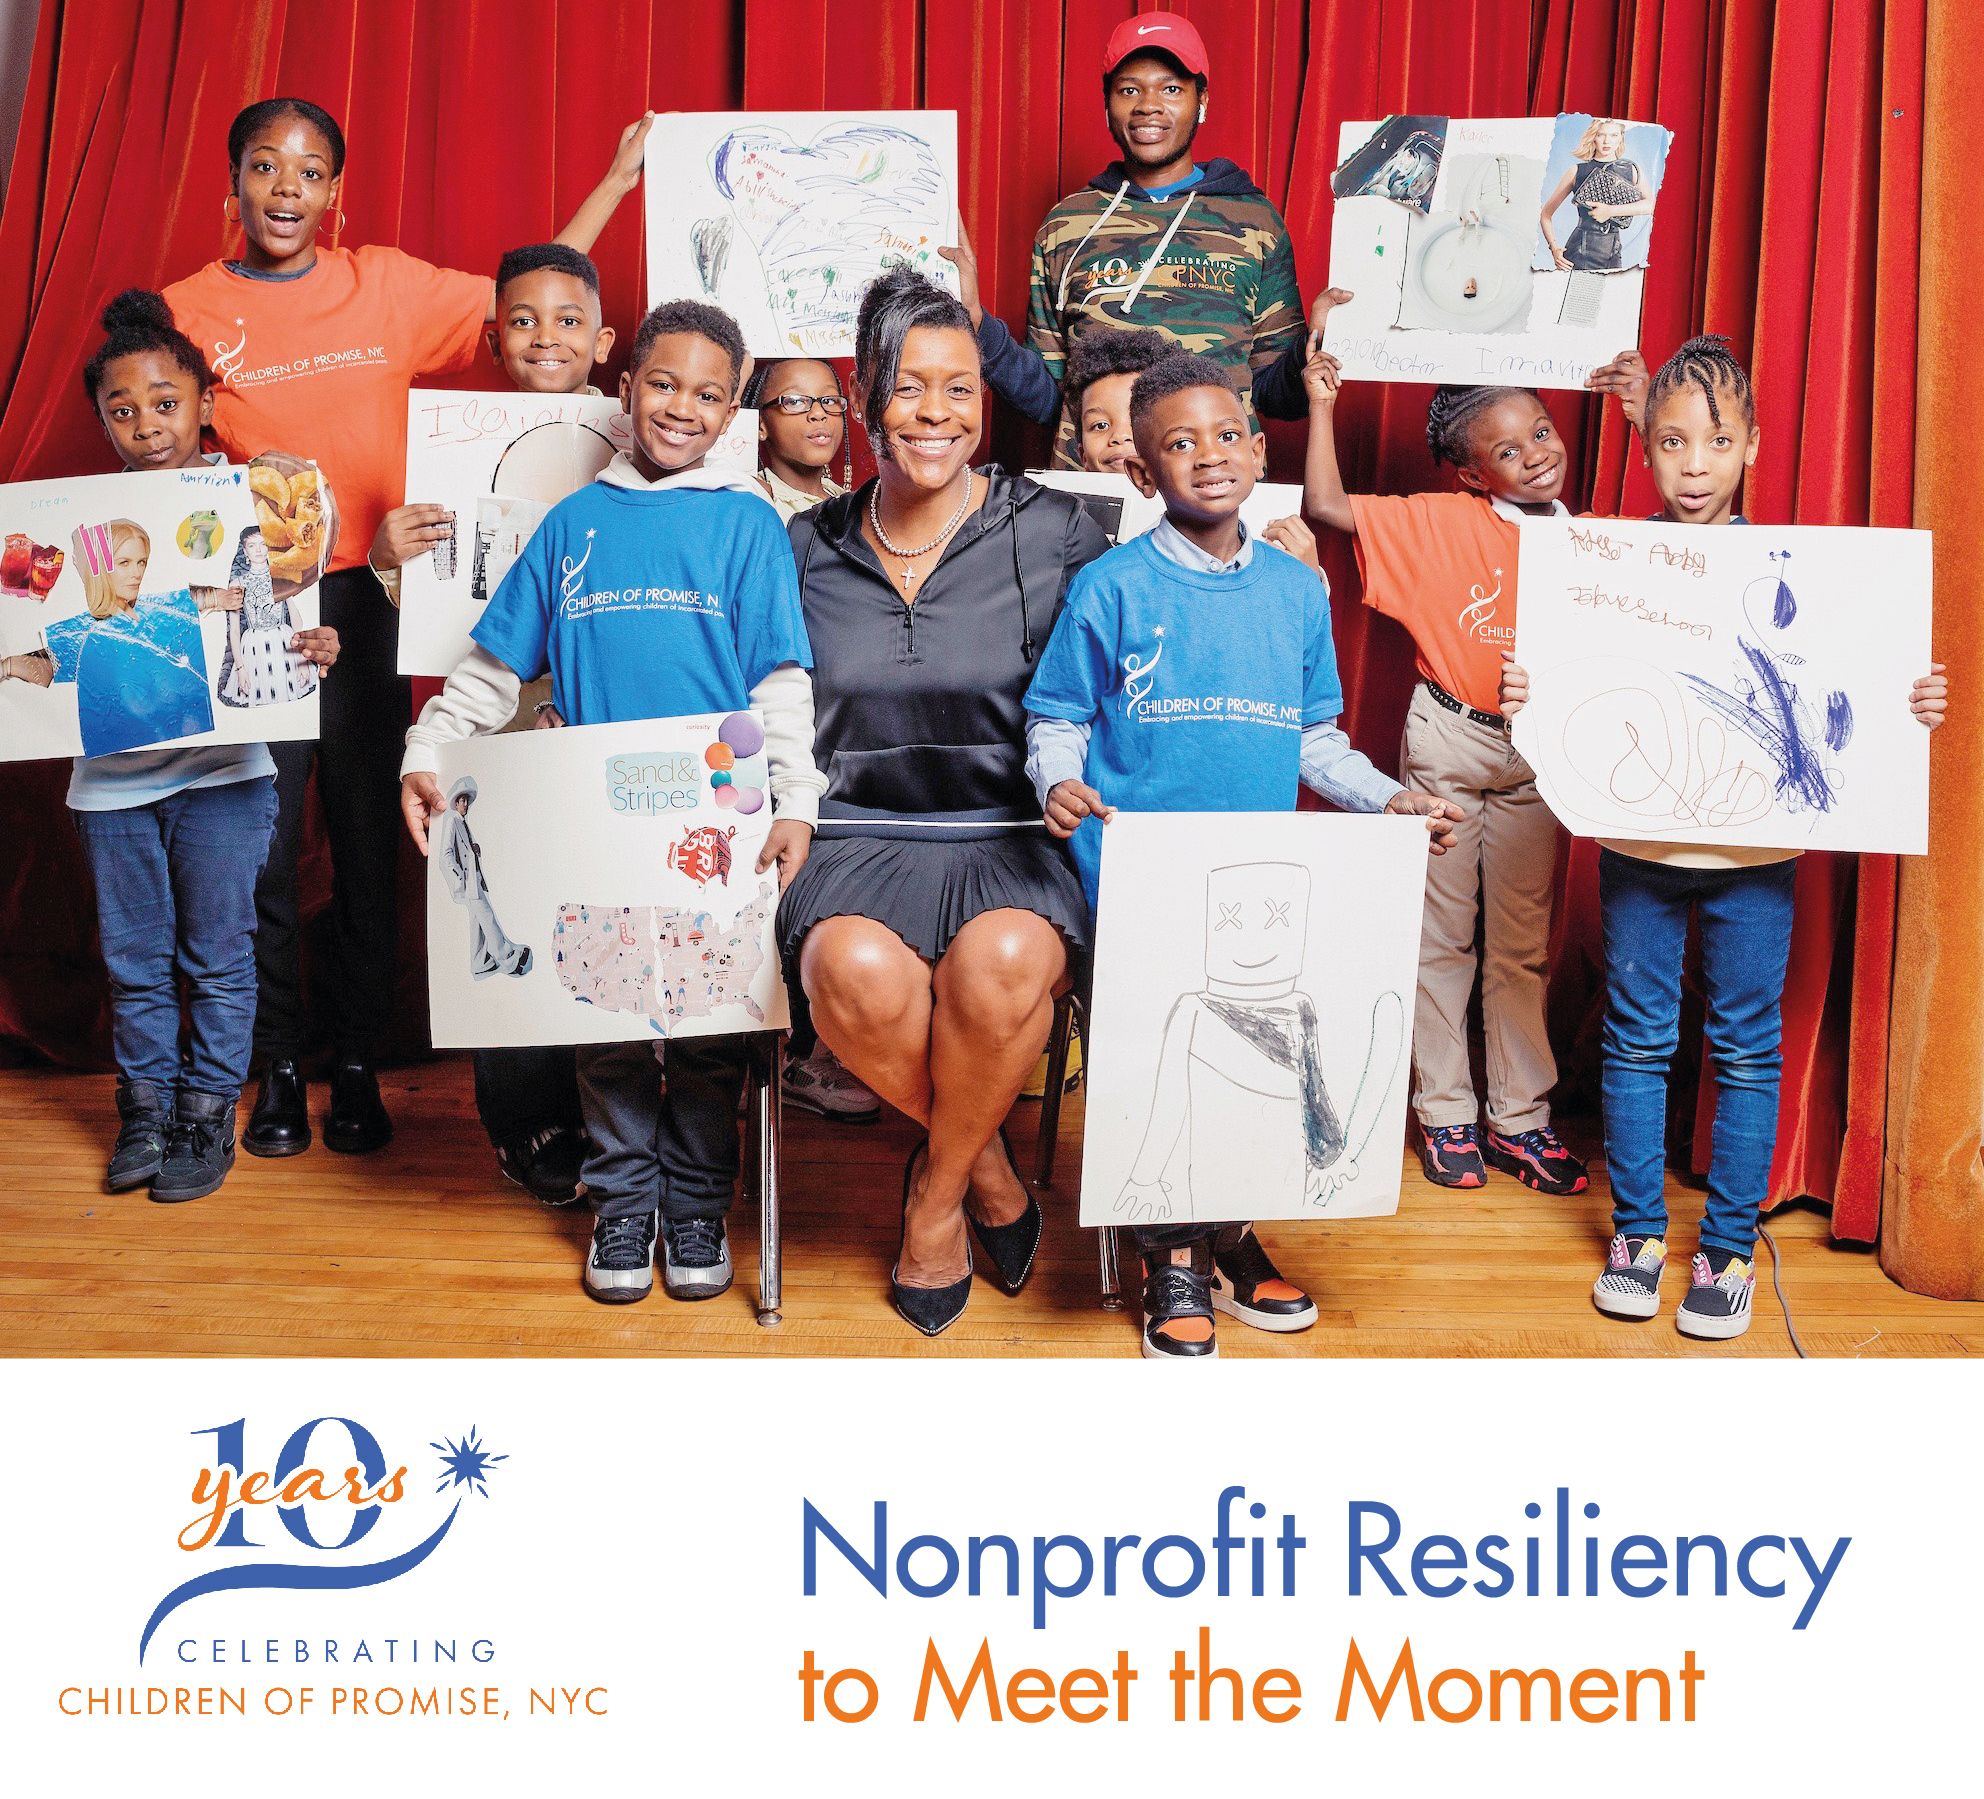 Nonprofit Resiliency to Meet the Moment - Children of Promise NYC